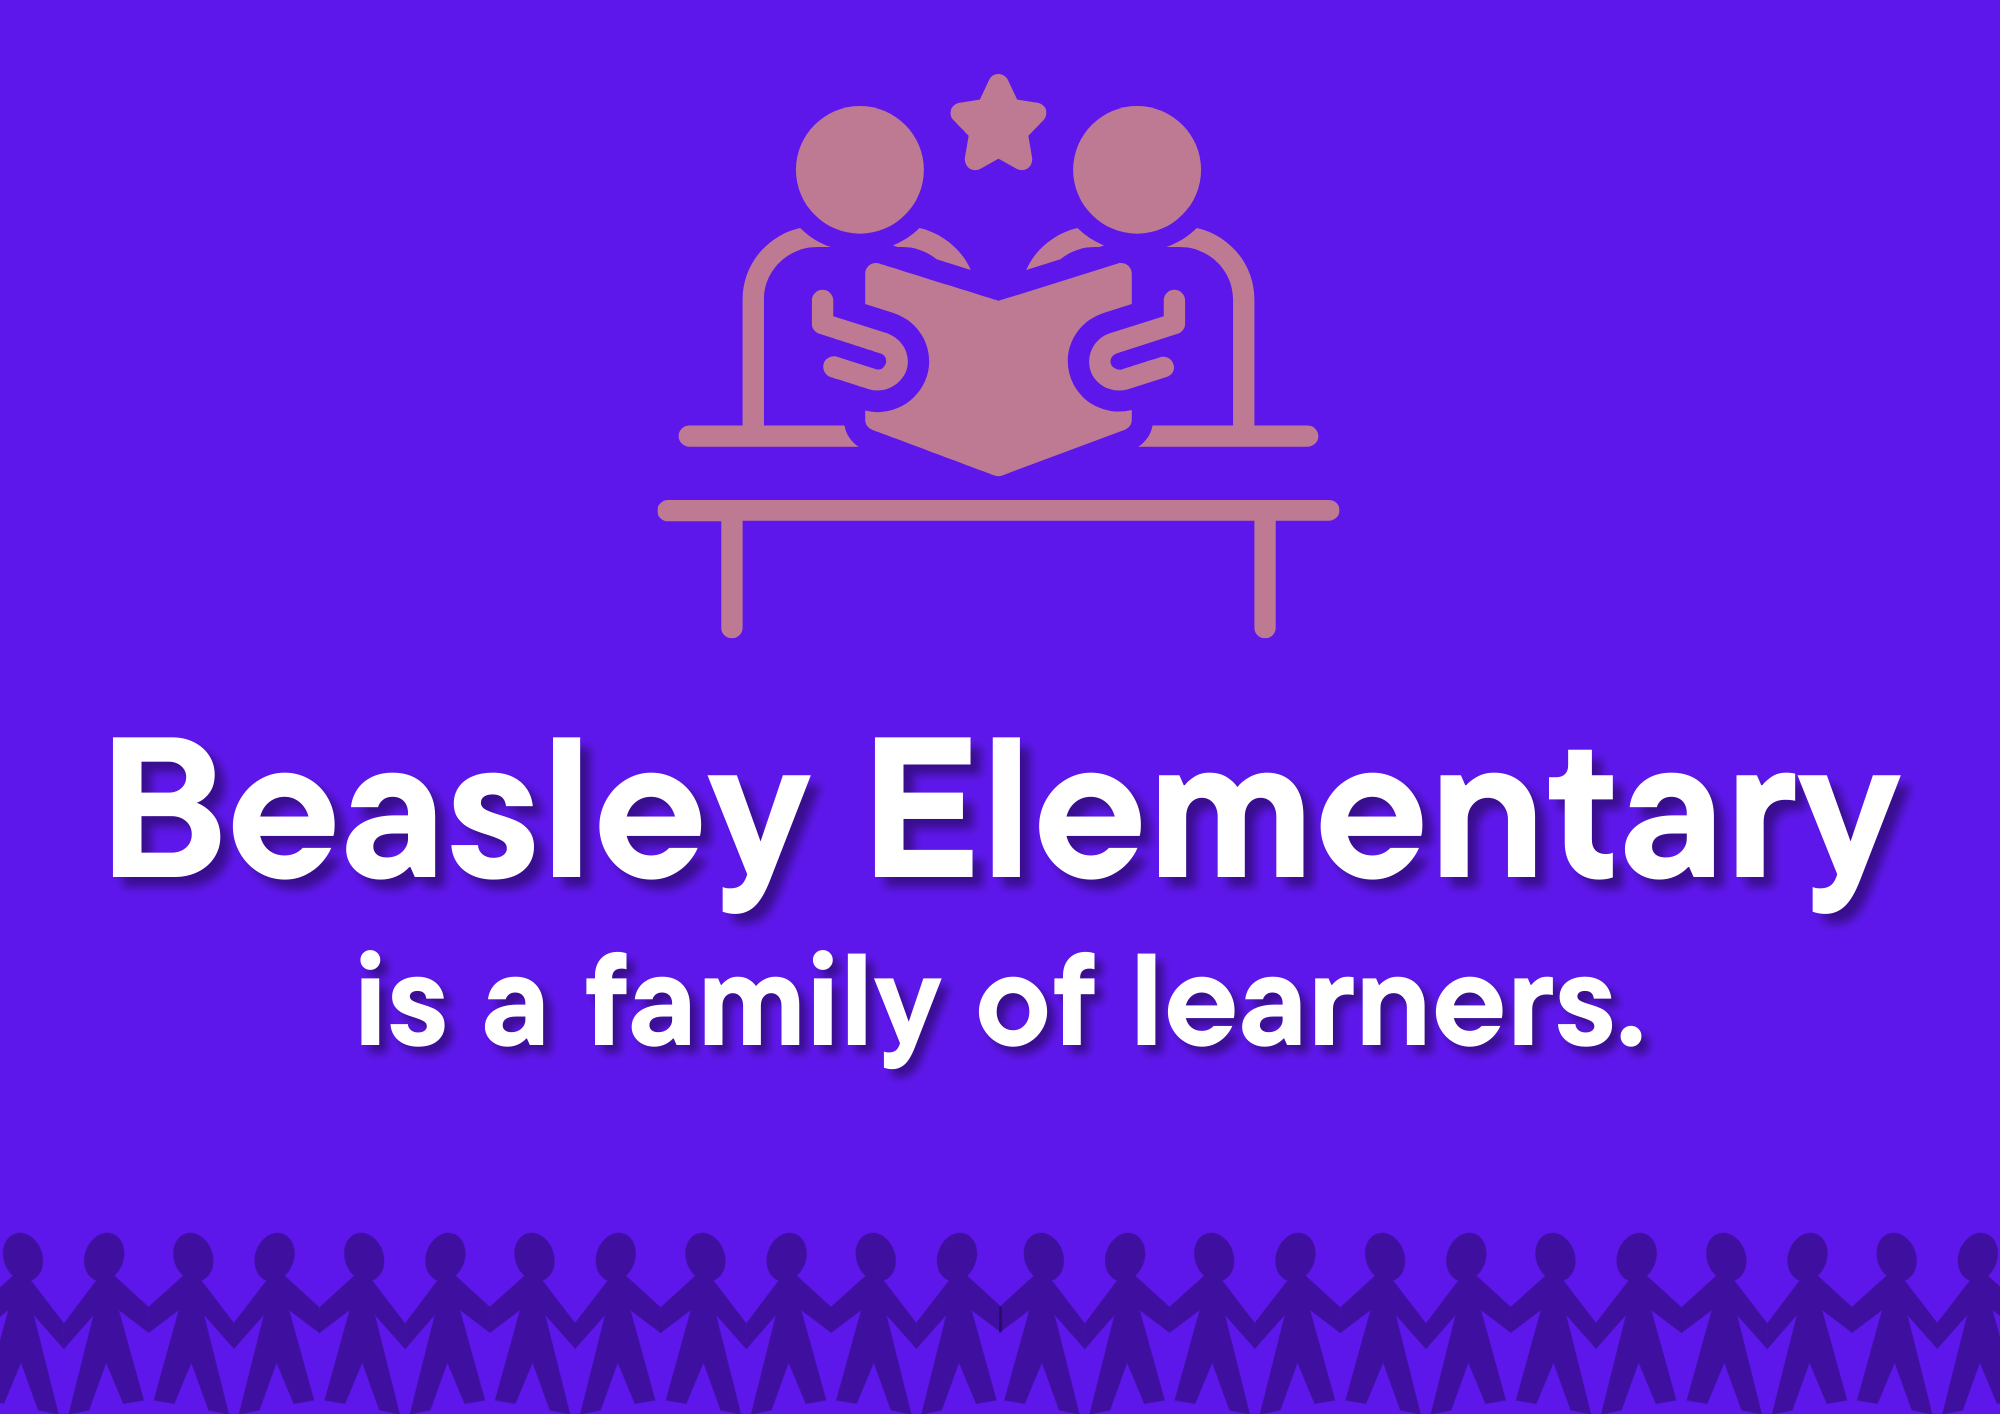 Beasley Elementary is a family of learners.